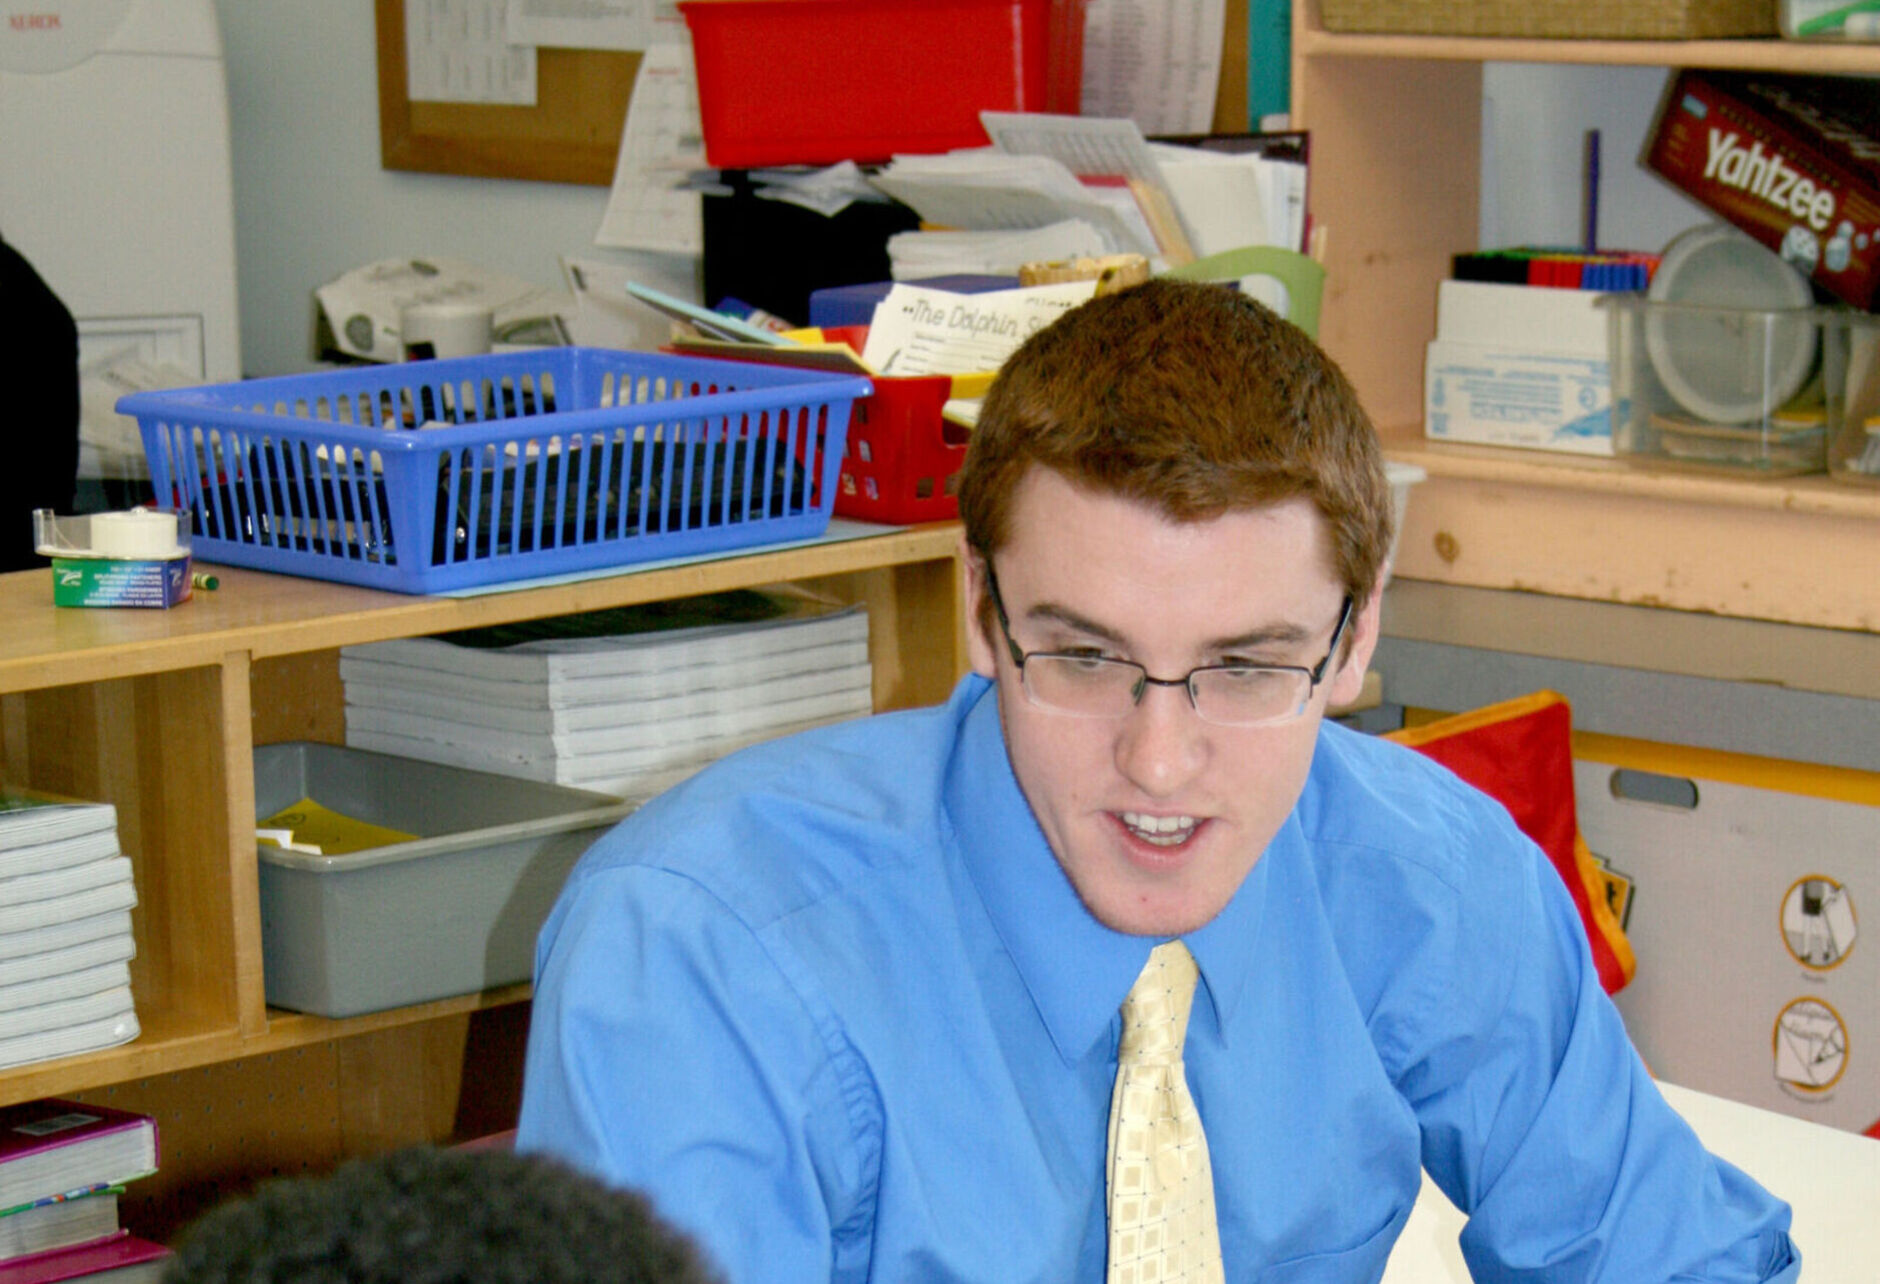 A student teacher works with a student in a classroom